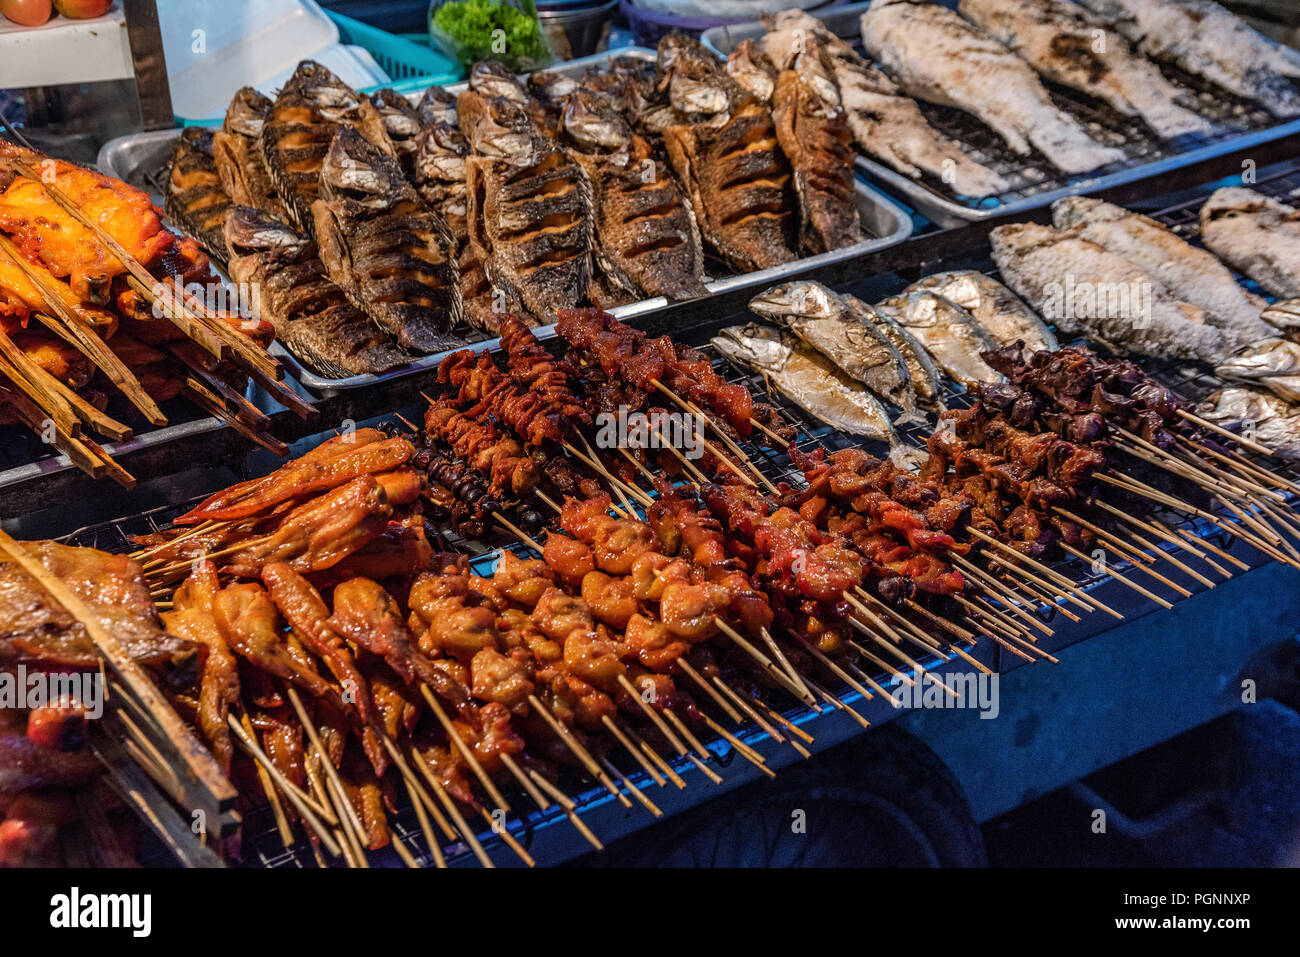 Thai barbecue street food stand Stock Photo - Alamy